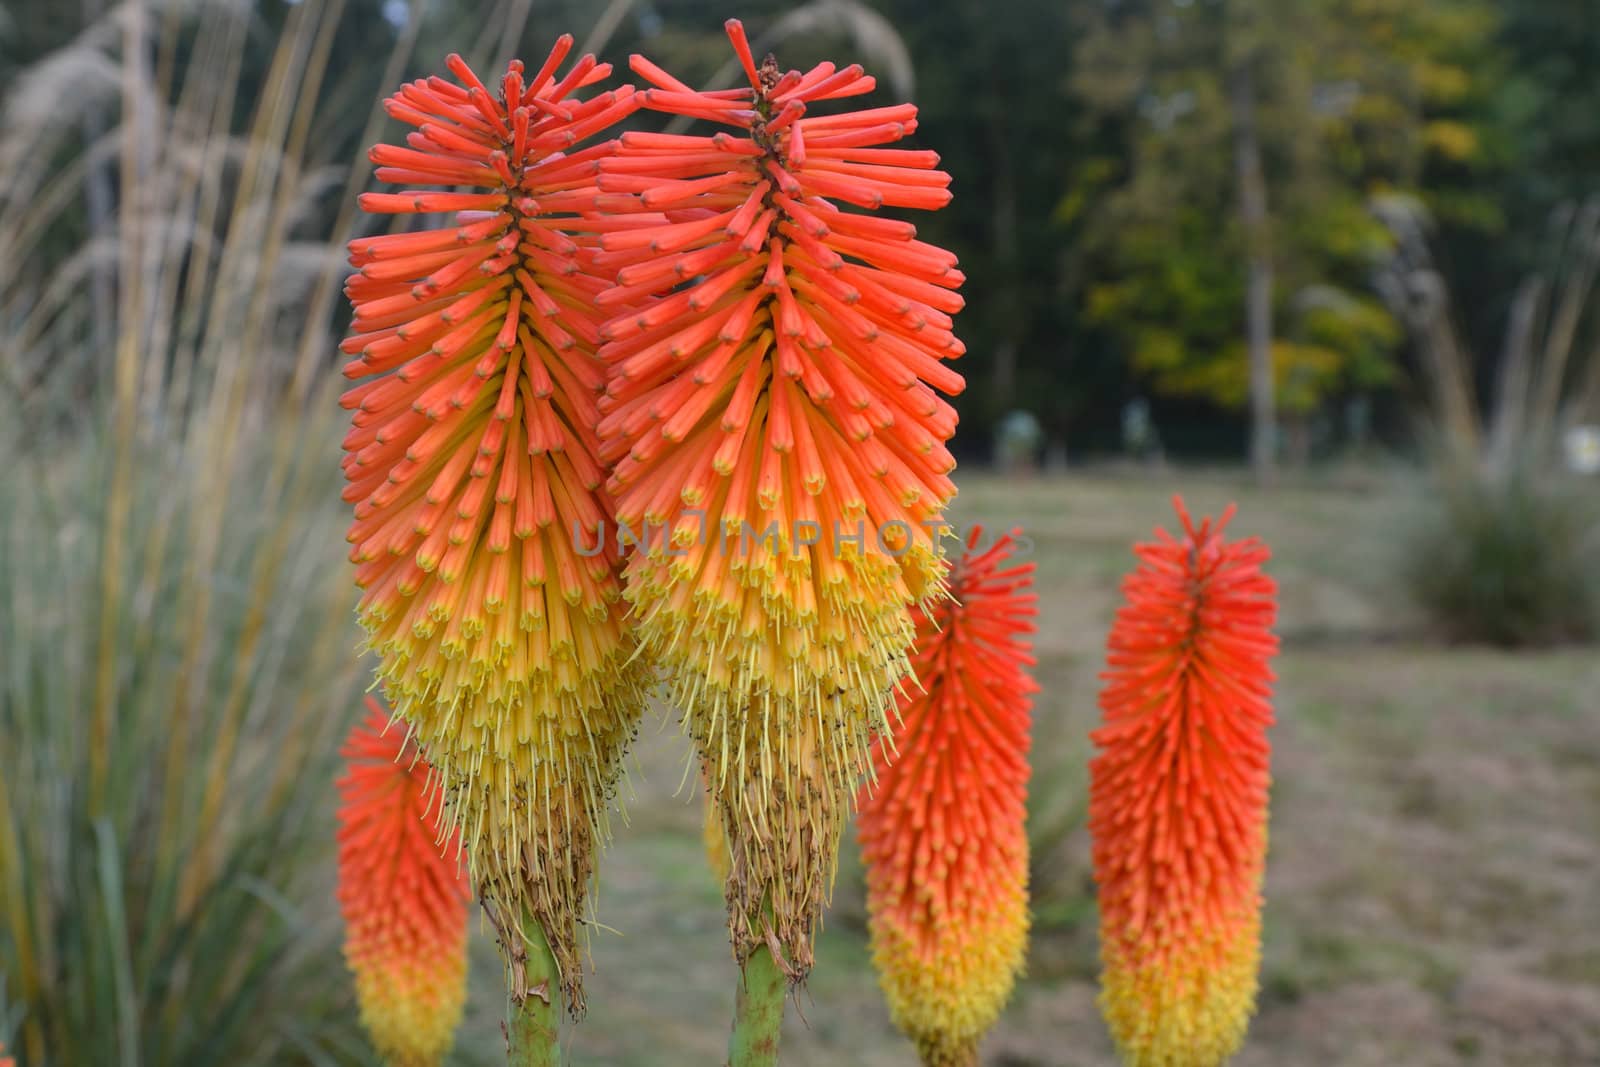 Red hot pokers in group by pauws99